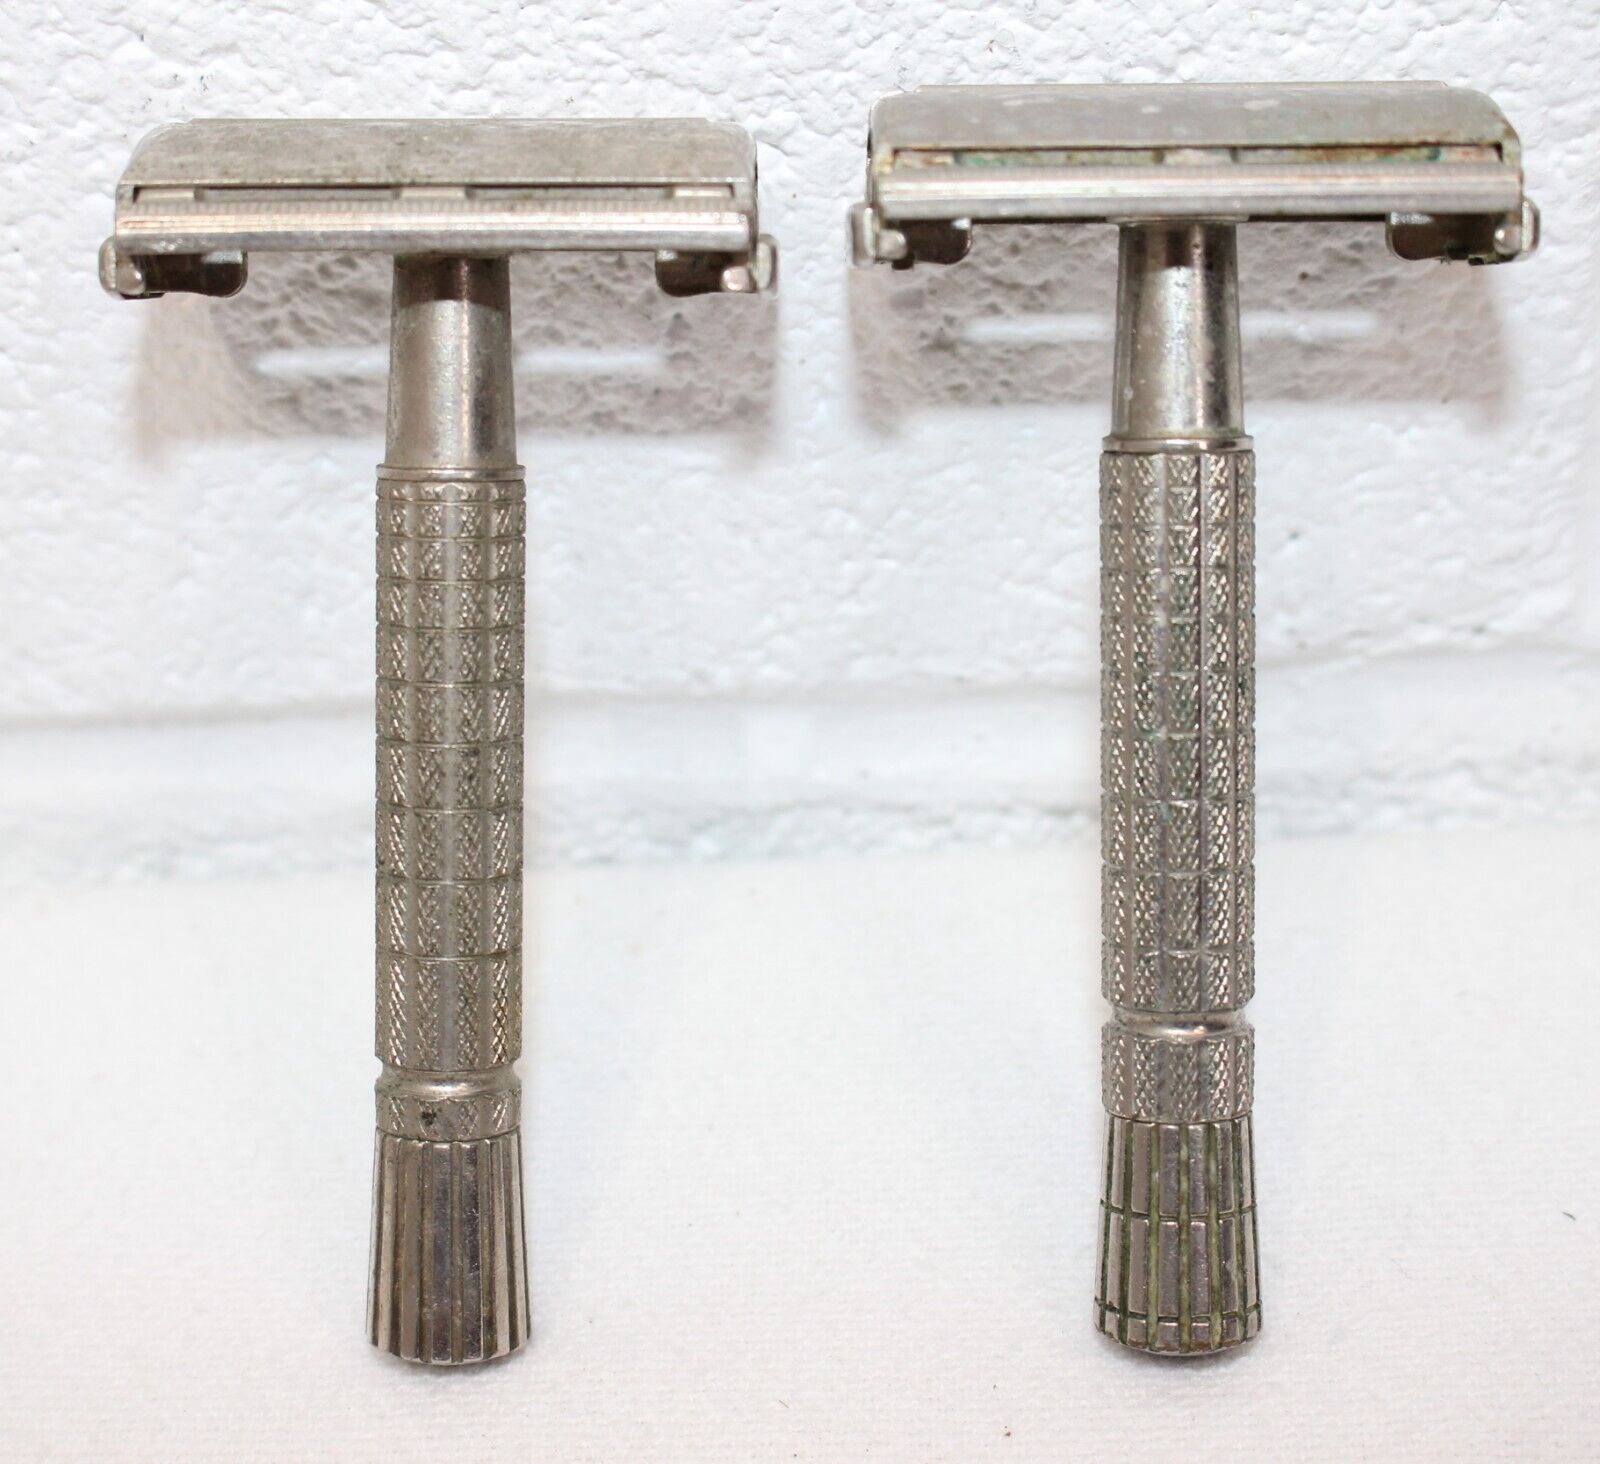 Lot of 2 Vintage Gillette Safety Razors, a bit rough, SEE PICTURES No blades